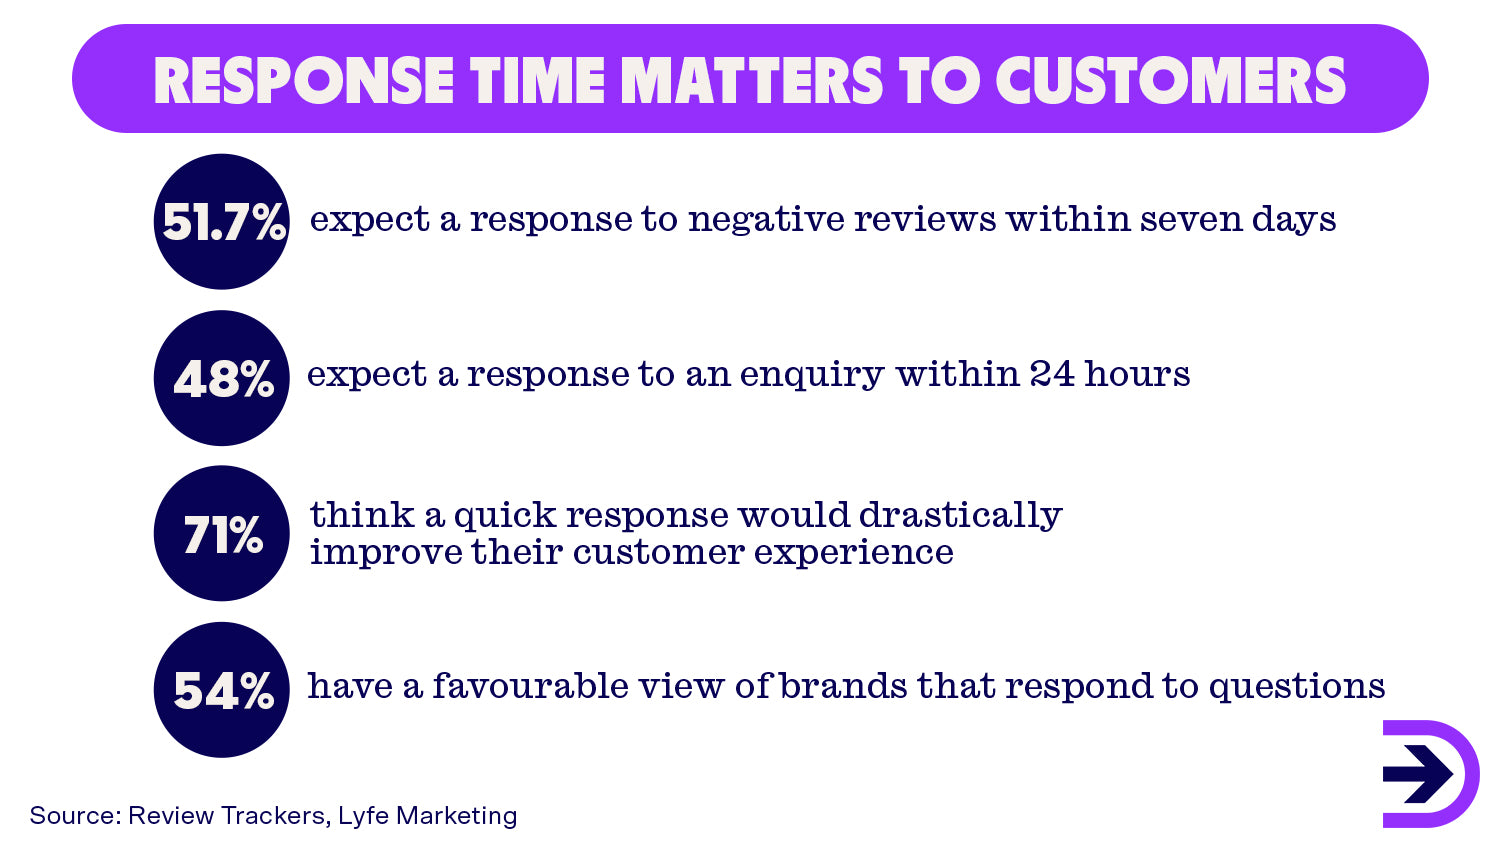 Response time is a significant factor in how a customer perceives their customer service experience with 48% reporting that they expect a response in 24 hours.